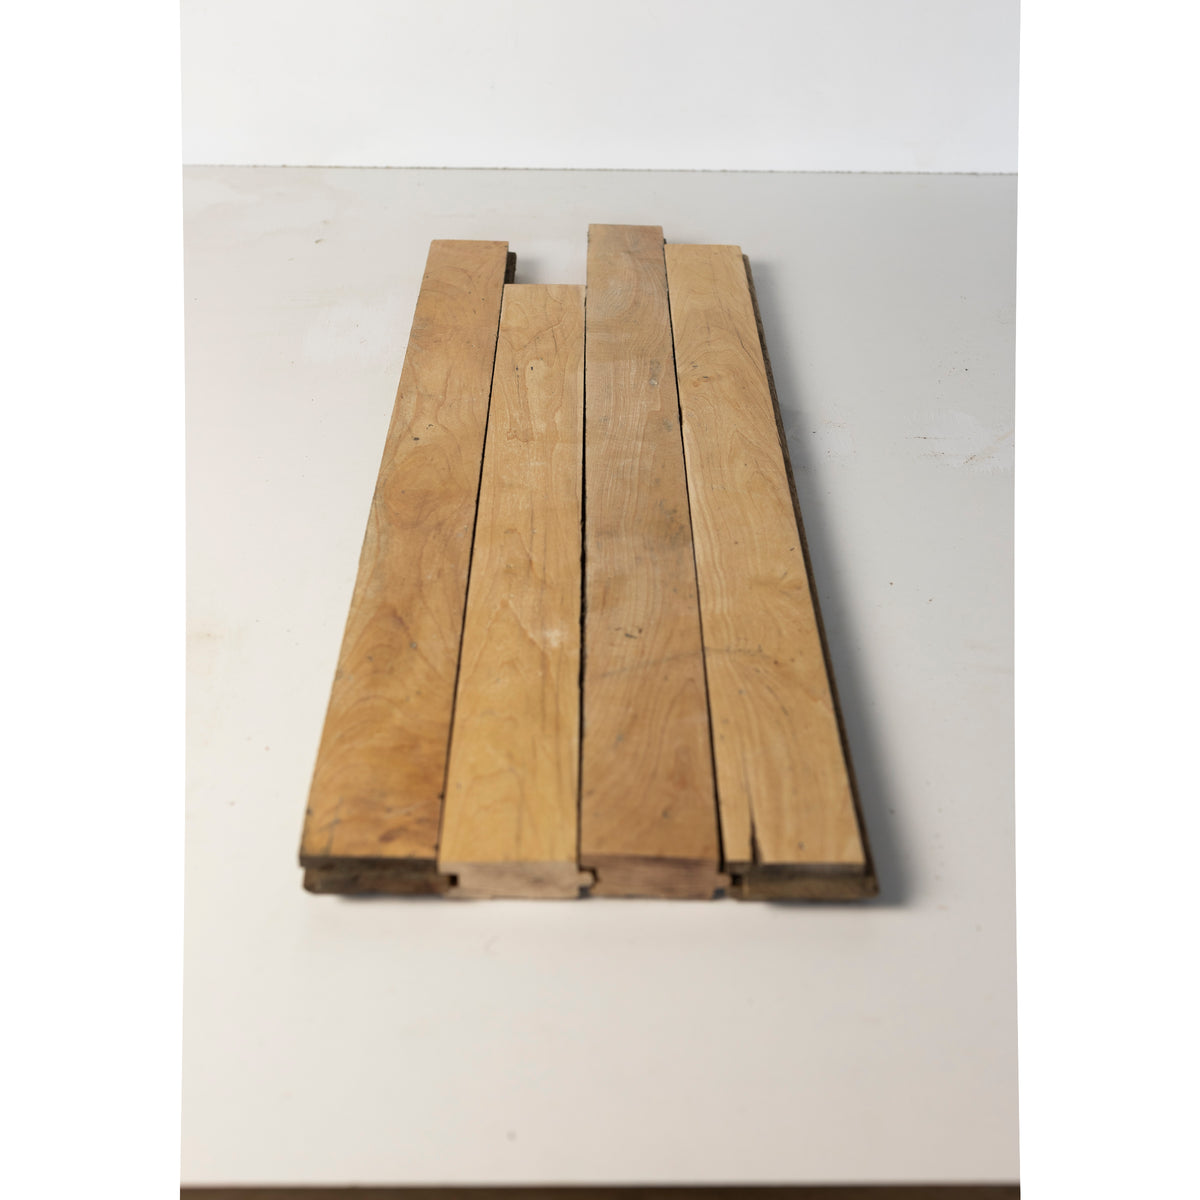 Antique Canadian Maple Cladding | Flooring 1100m2 Available | The Architectural Forum